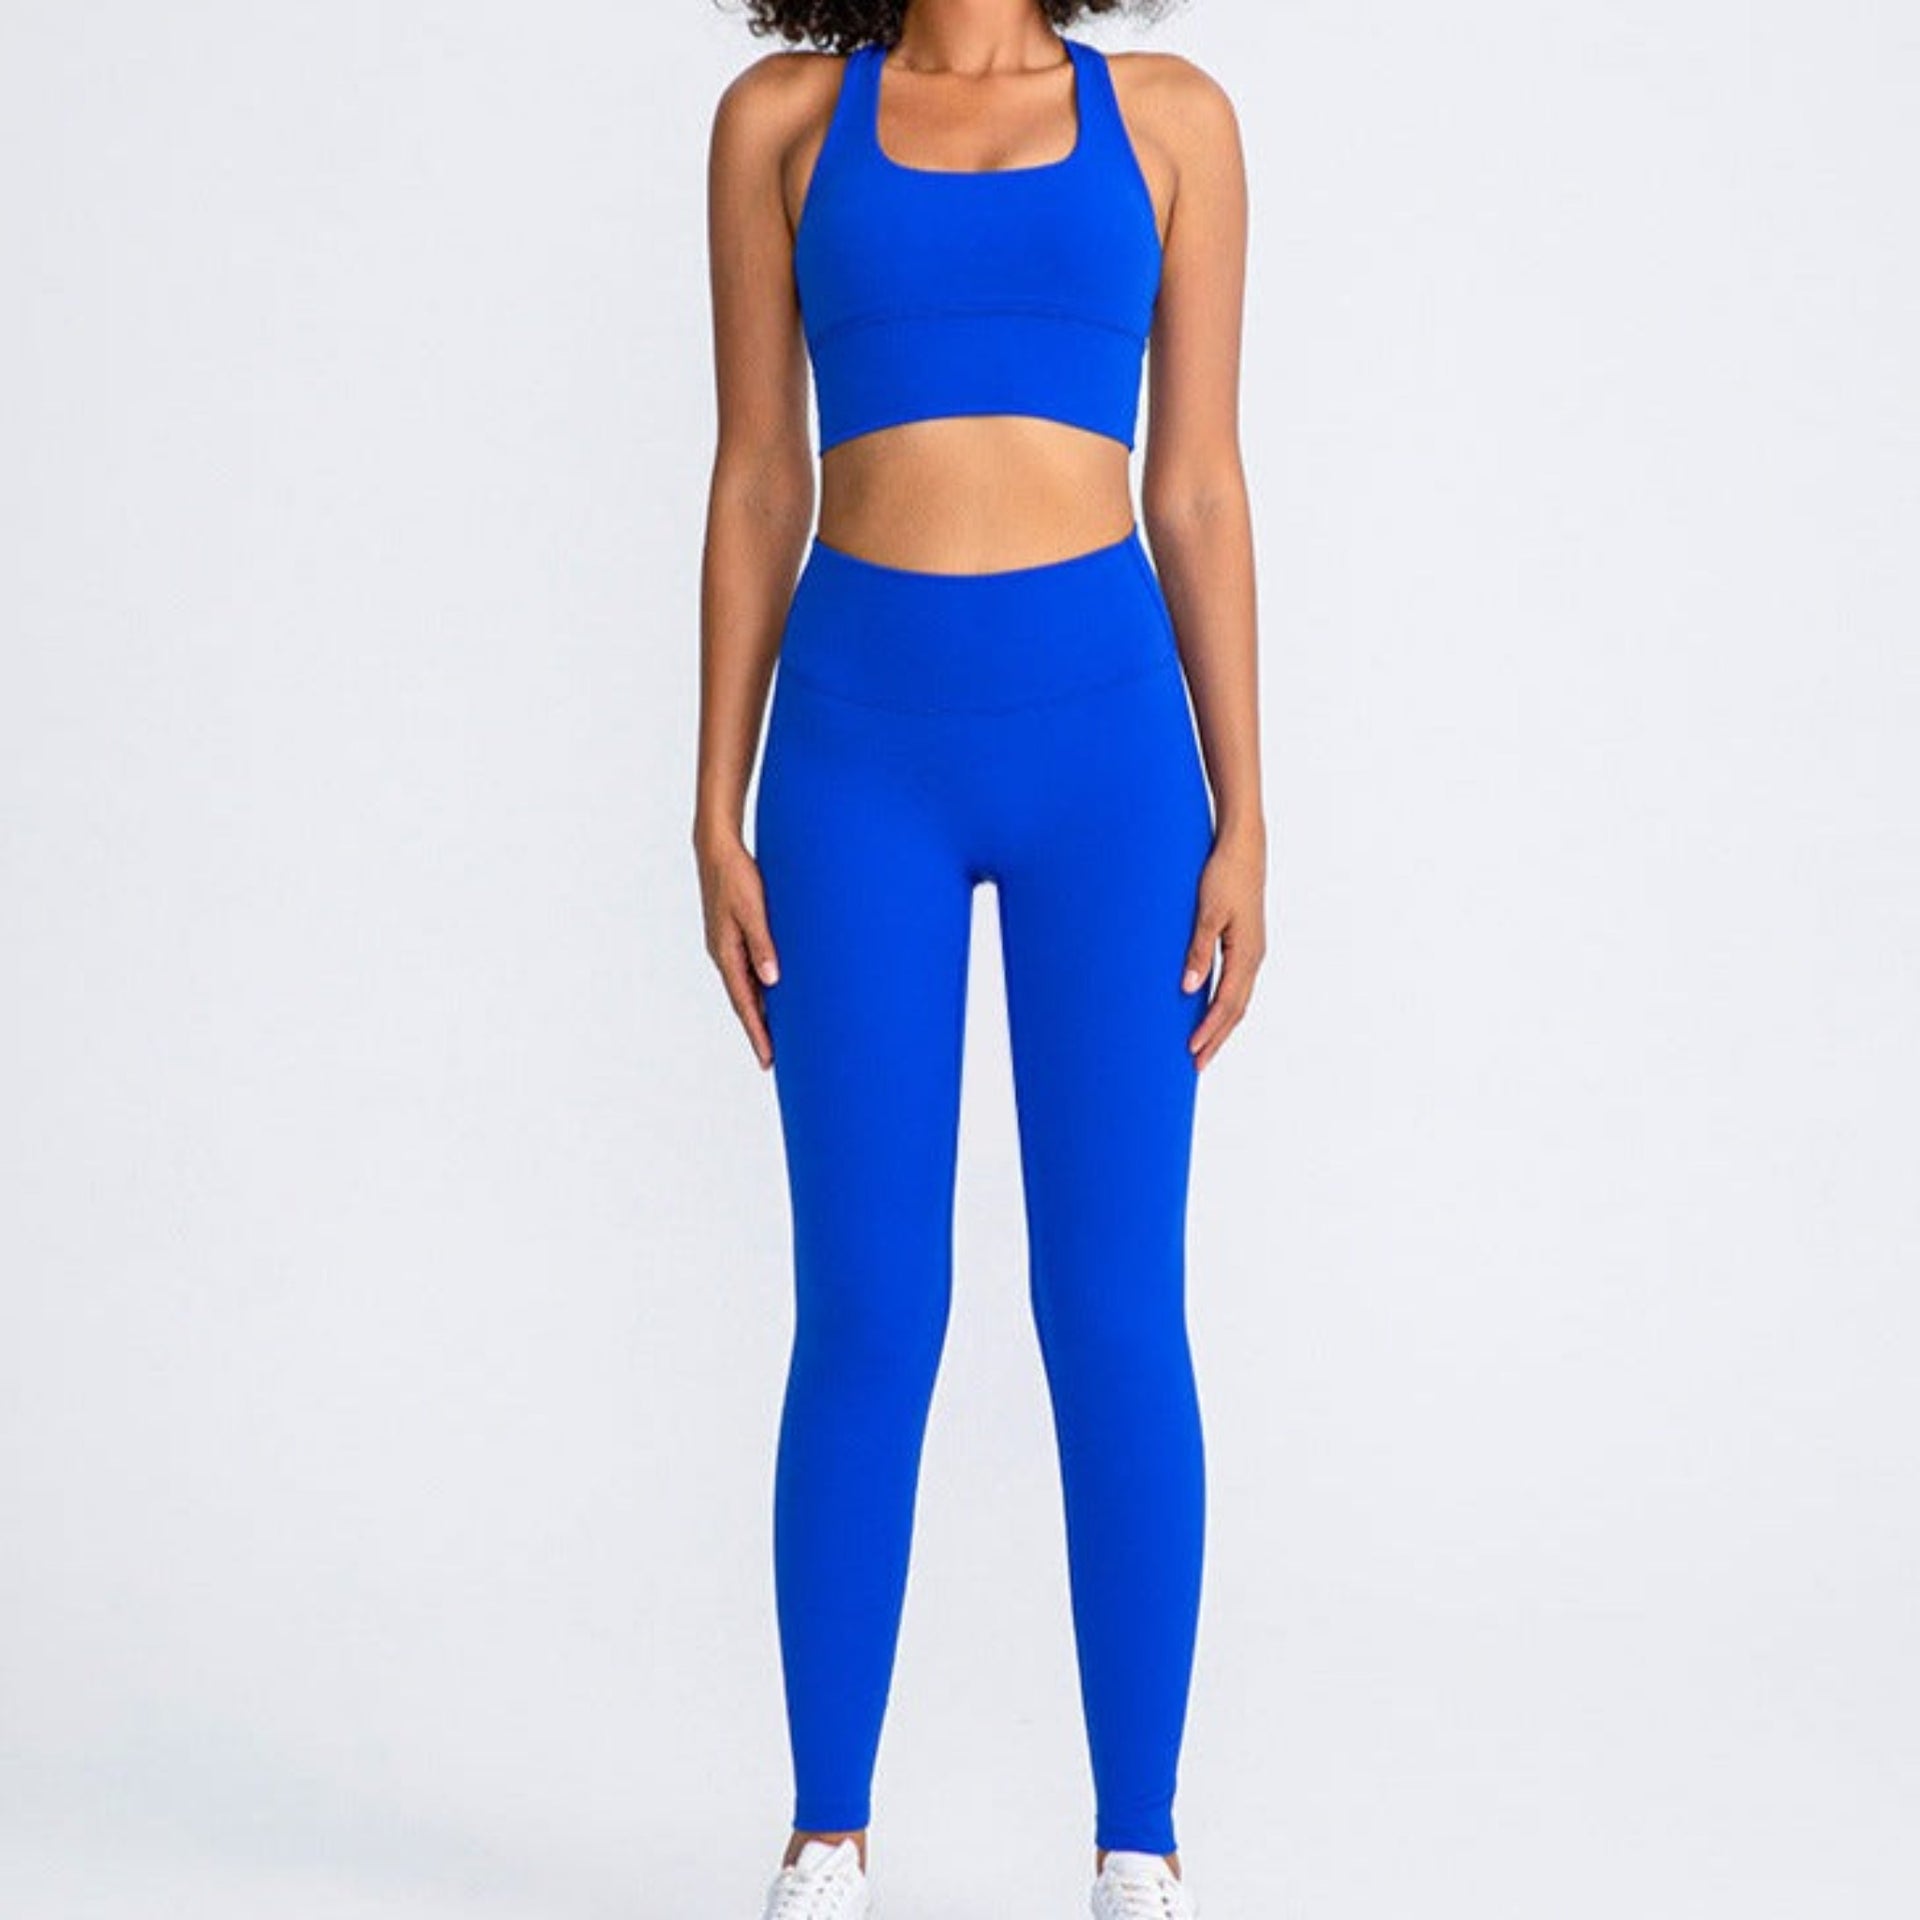 Love & Other Things Petite gym coordinating sports bra in cobalt blue